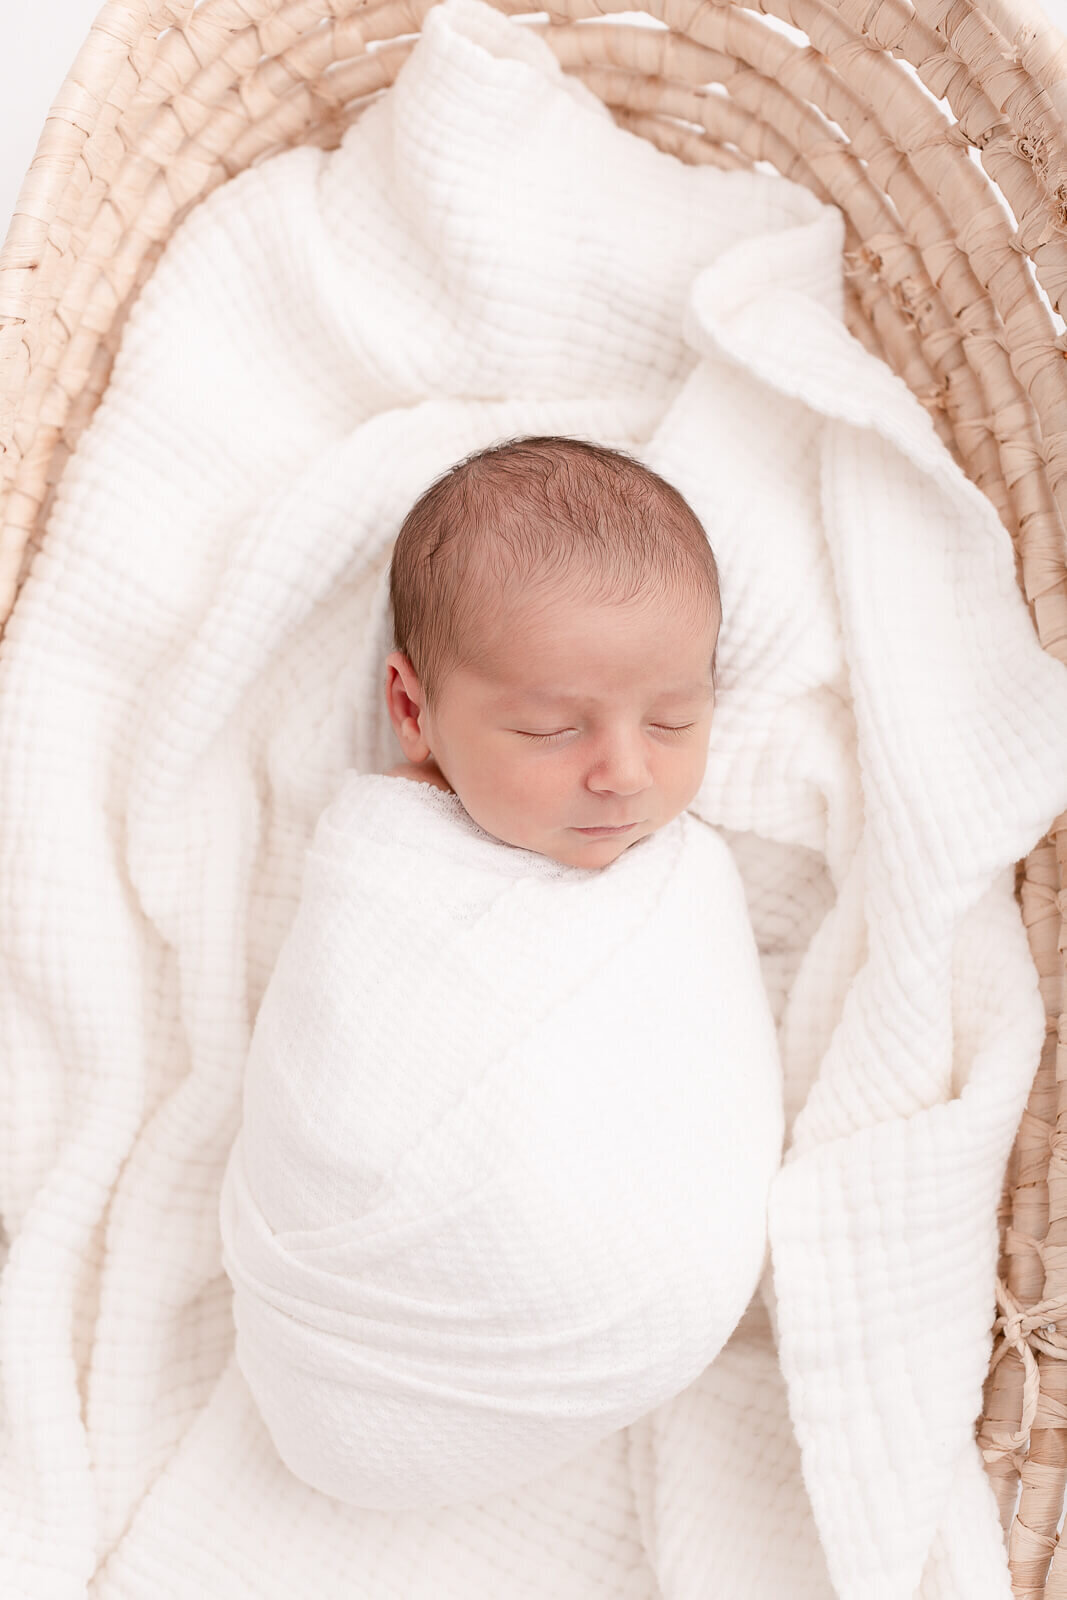 Baby wrapped in white and laying on white textured blankets inside a moses basket. The image is shot from above and only shows parts of the moses basket.